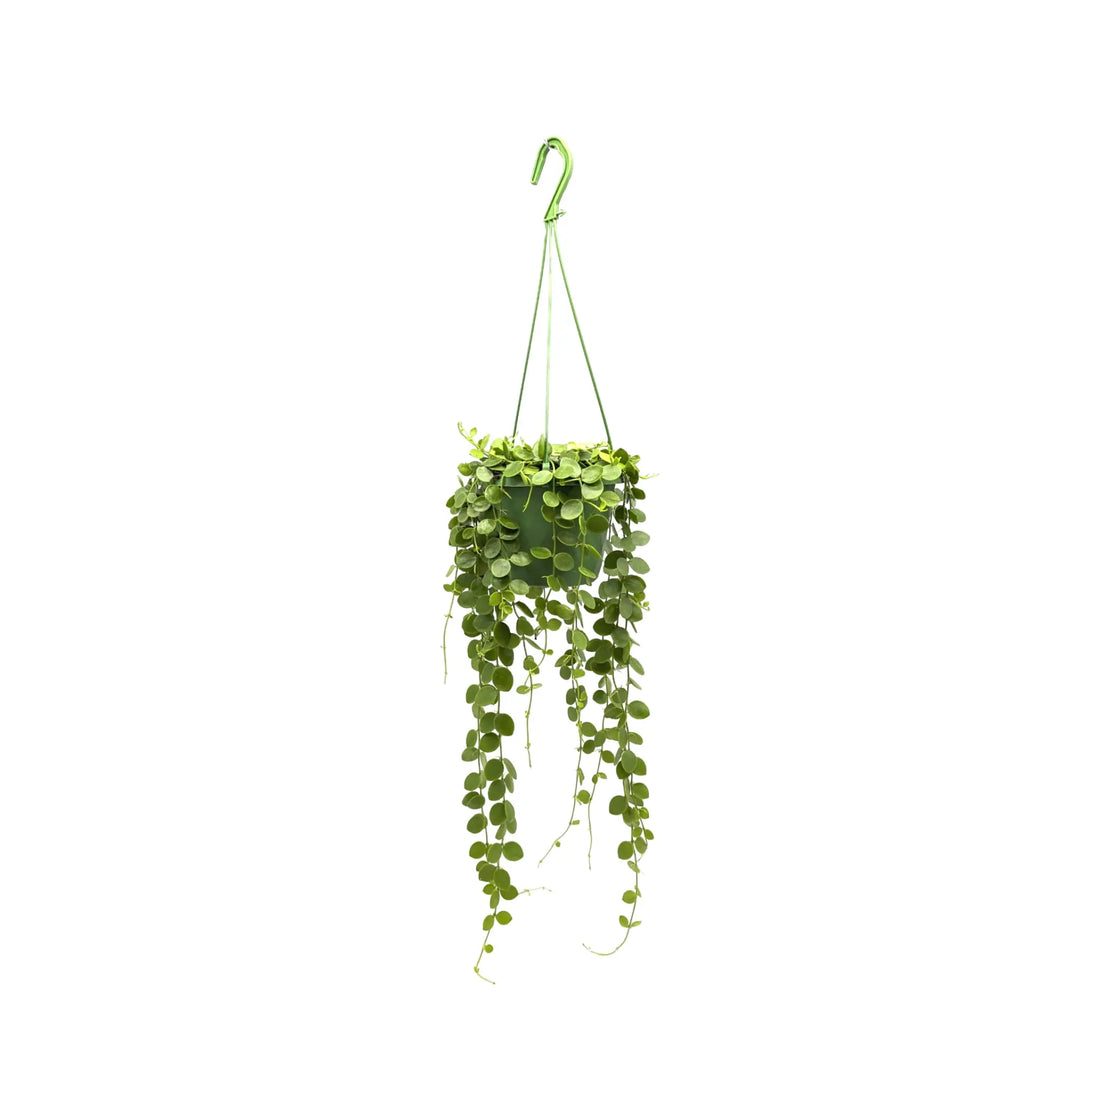 Dischidia nummularia Hanging House Plant - String of Nickels Leaf Culture